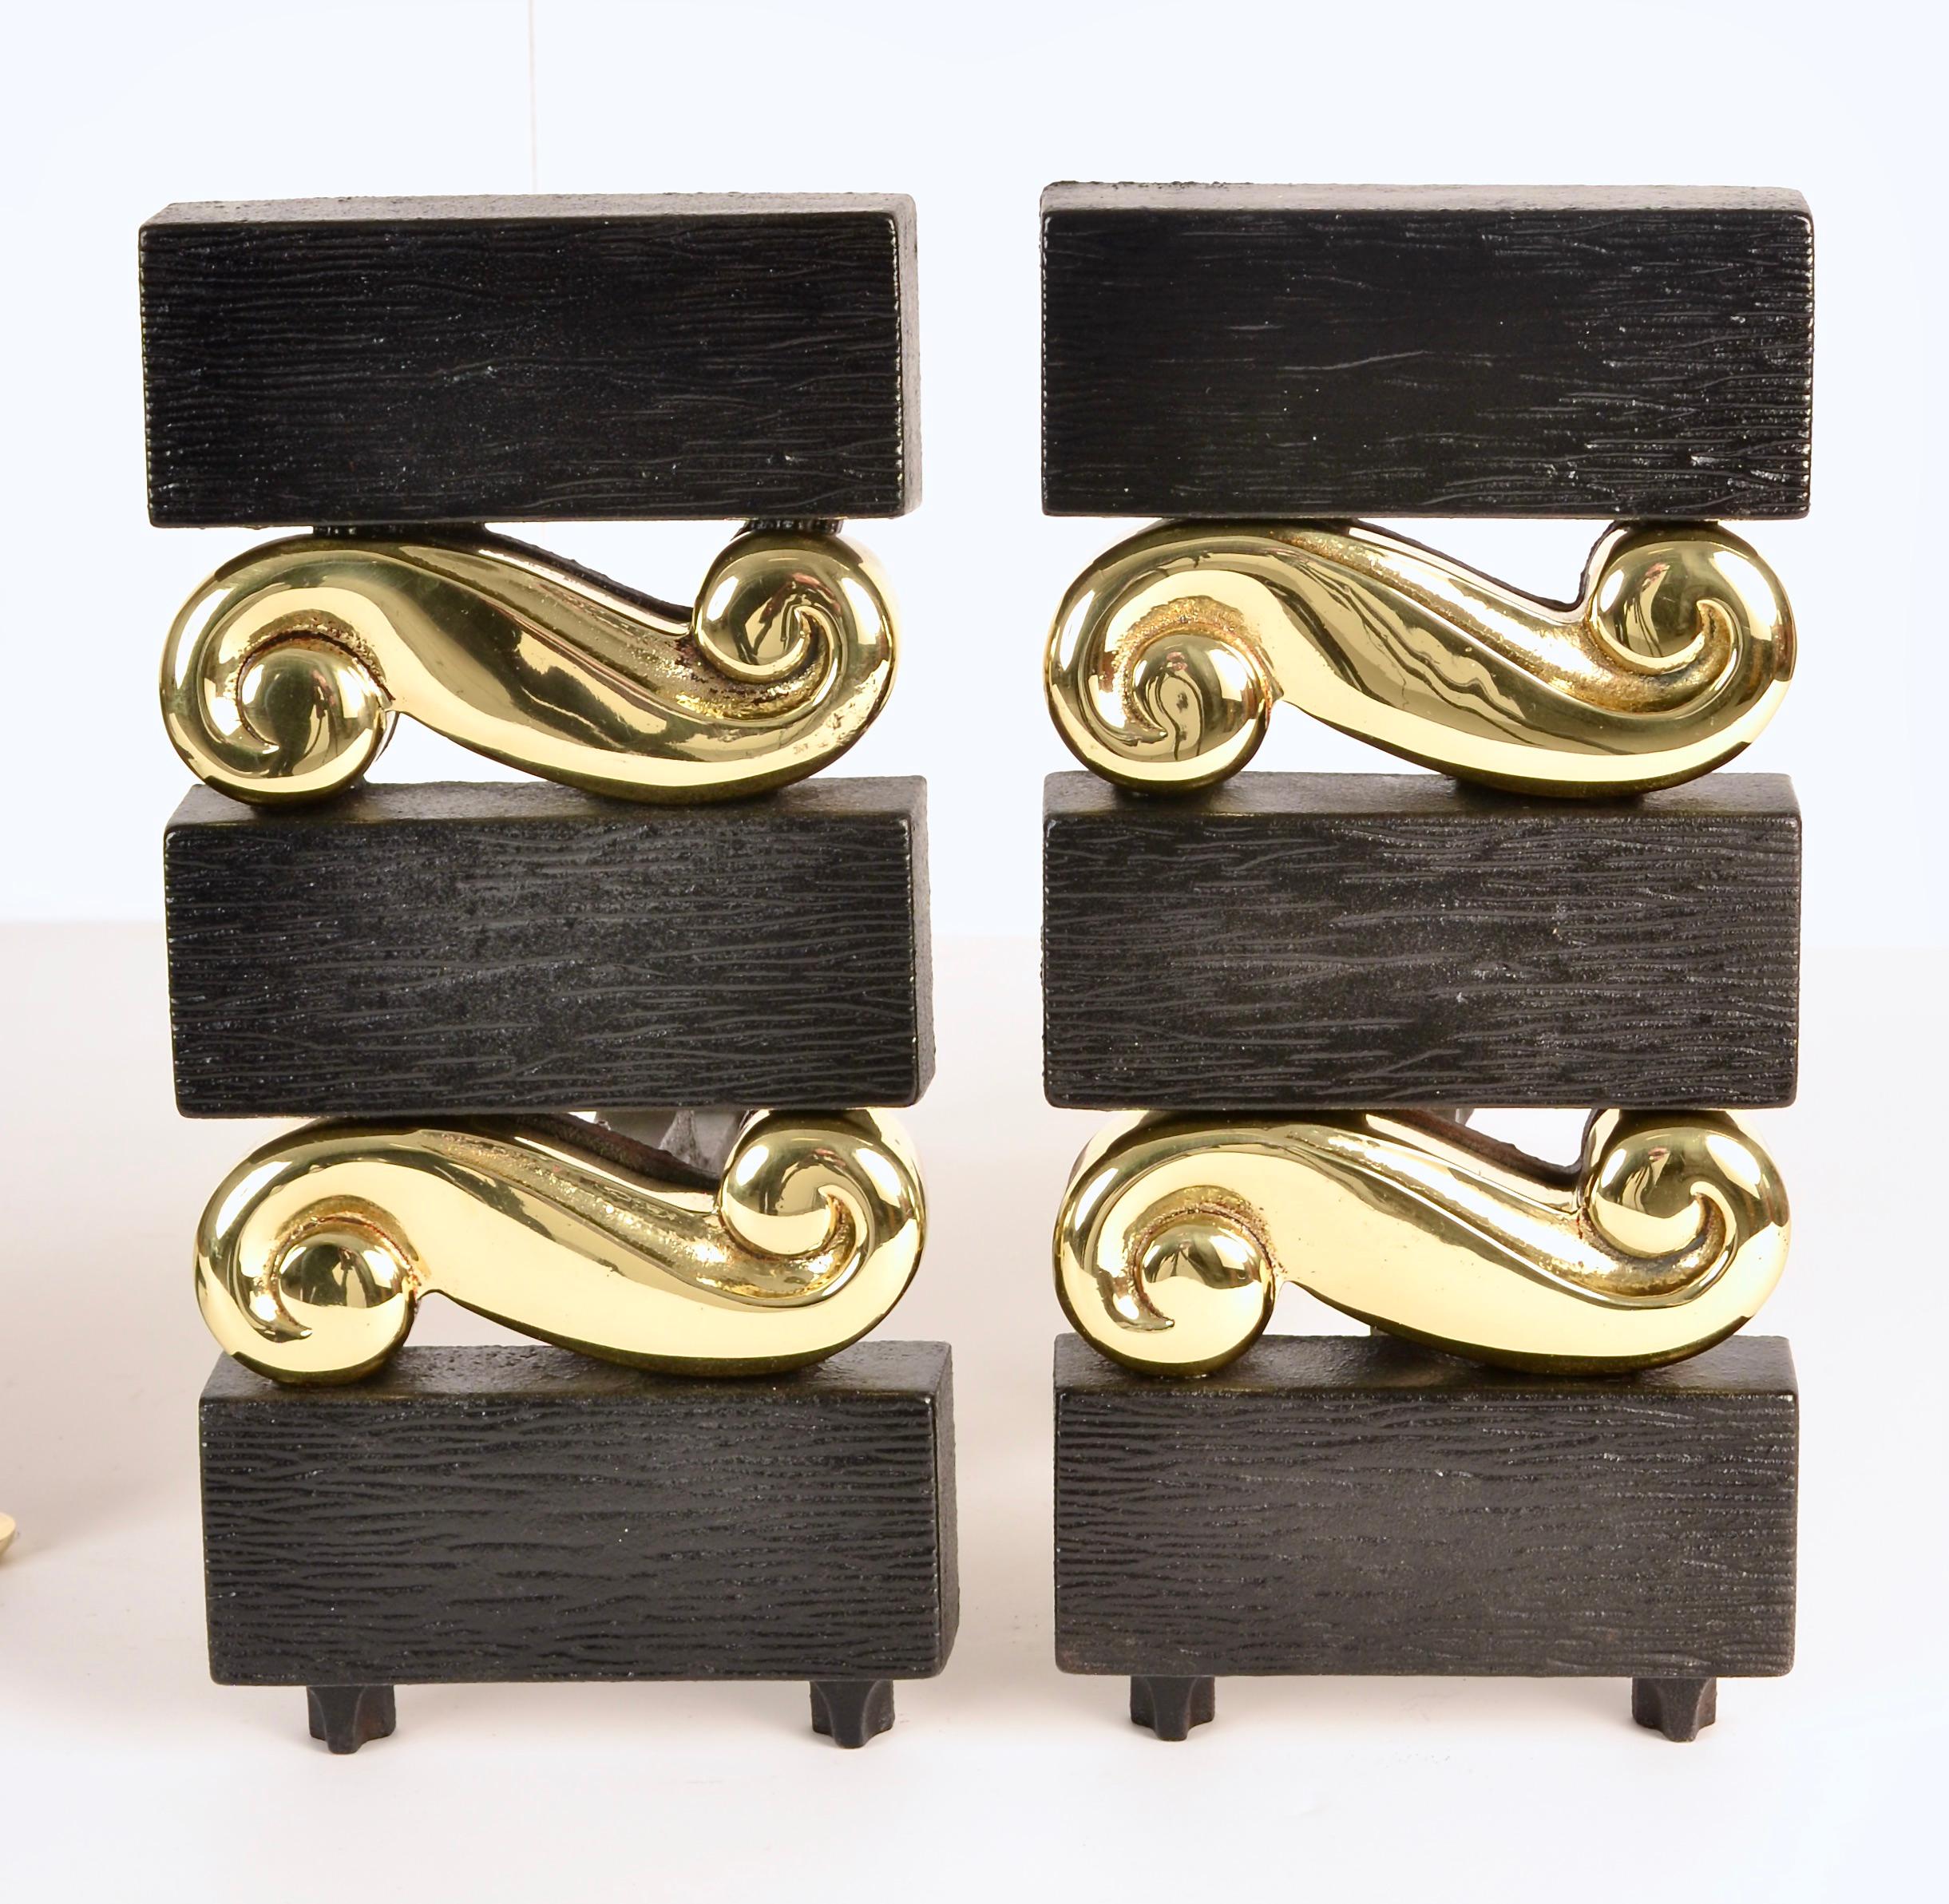 One of the most sophisticated and desirable designs by Donald Deskey, this set features a faux bois pattern on the cast iron, alternating with figured brass decorations. The pieces have been restored to original condition, polished and lacquered